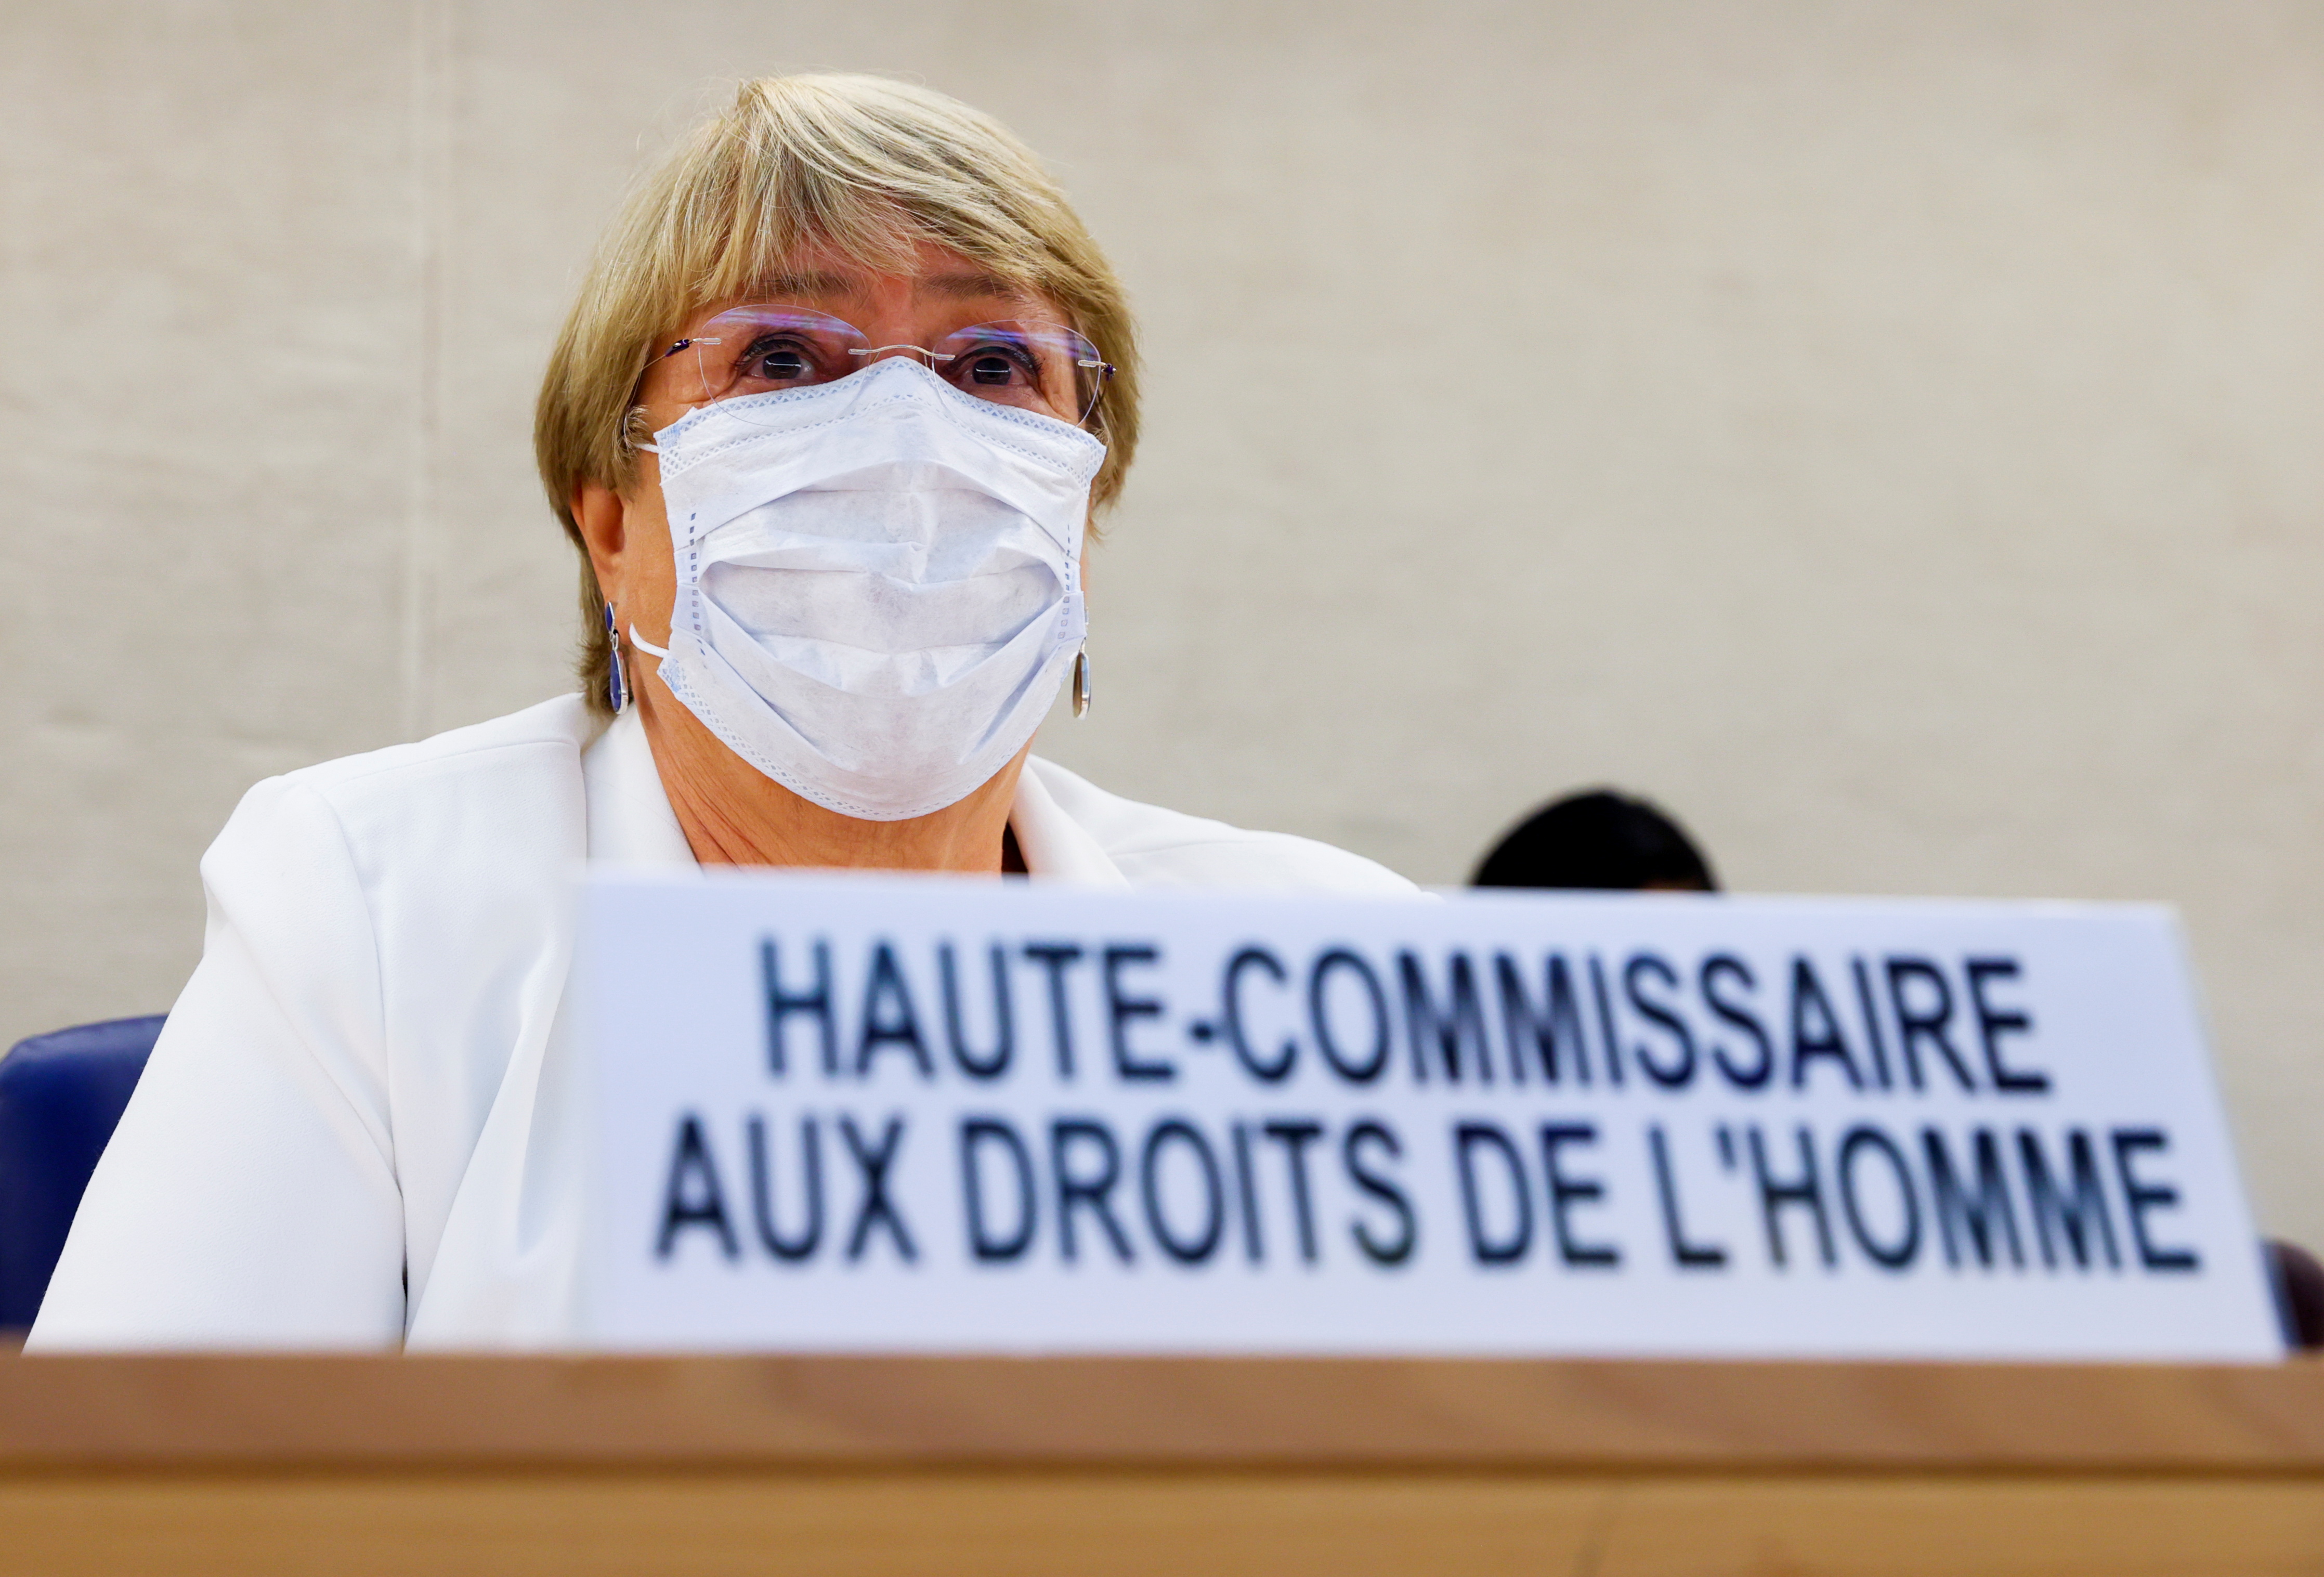 U.N. High Commissioner for Human Rights Michelle Bachelet wears a face mask at a special session of the Human Rights Council on the situation in Afghanistan, at the European headquarters of the United Nations in Geneva, Switzerland, August 24, 2021. REUTERS/Denis Balibouse